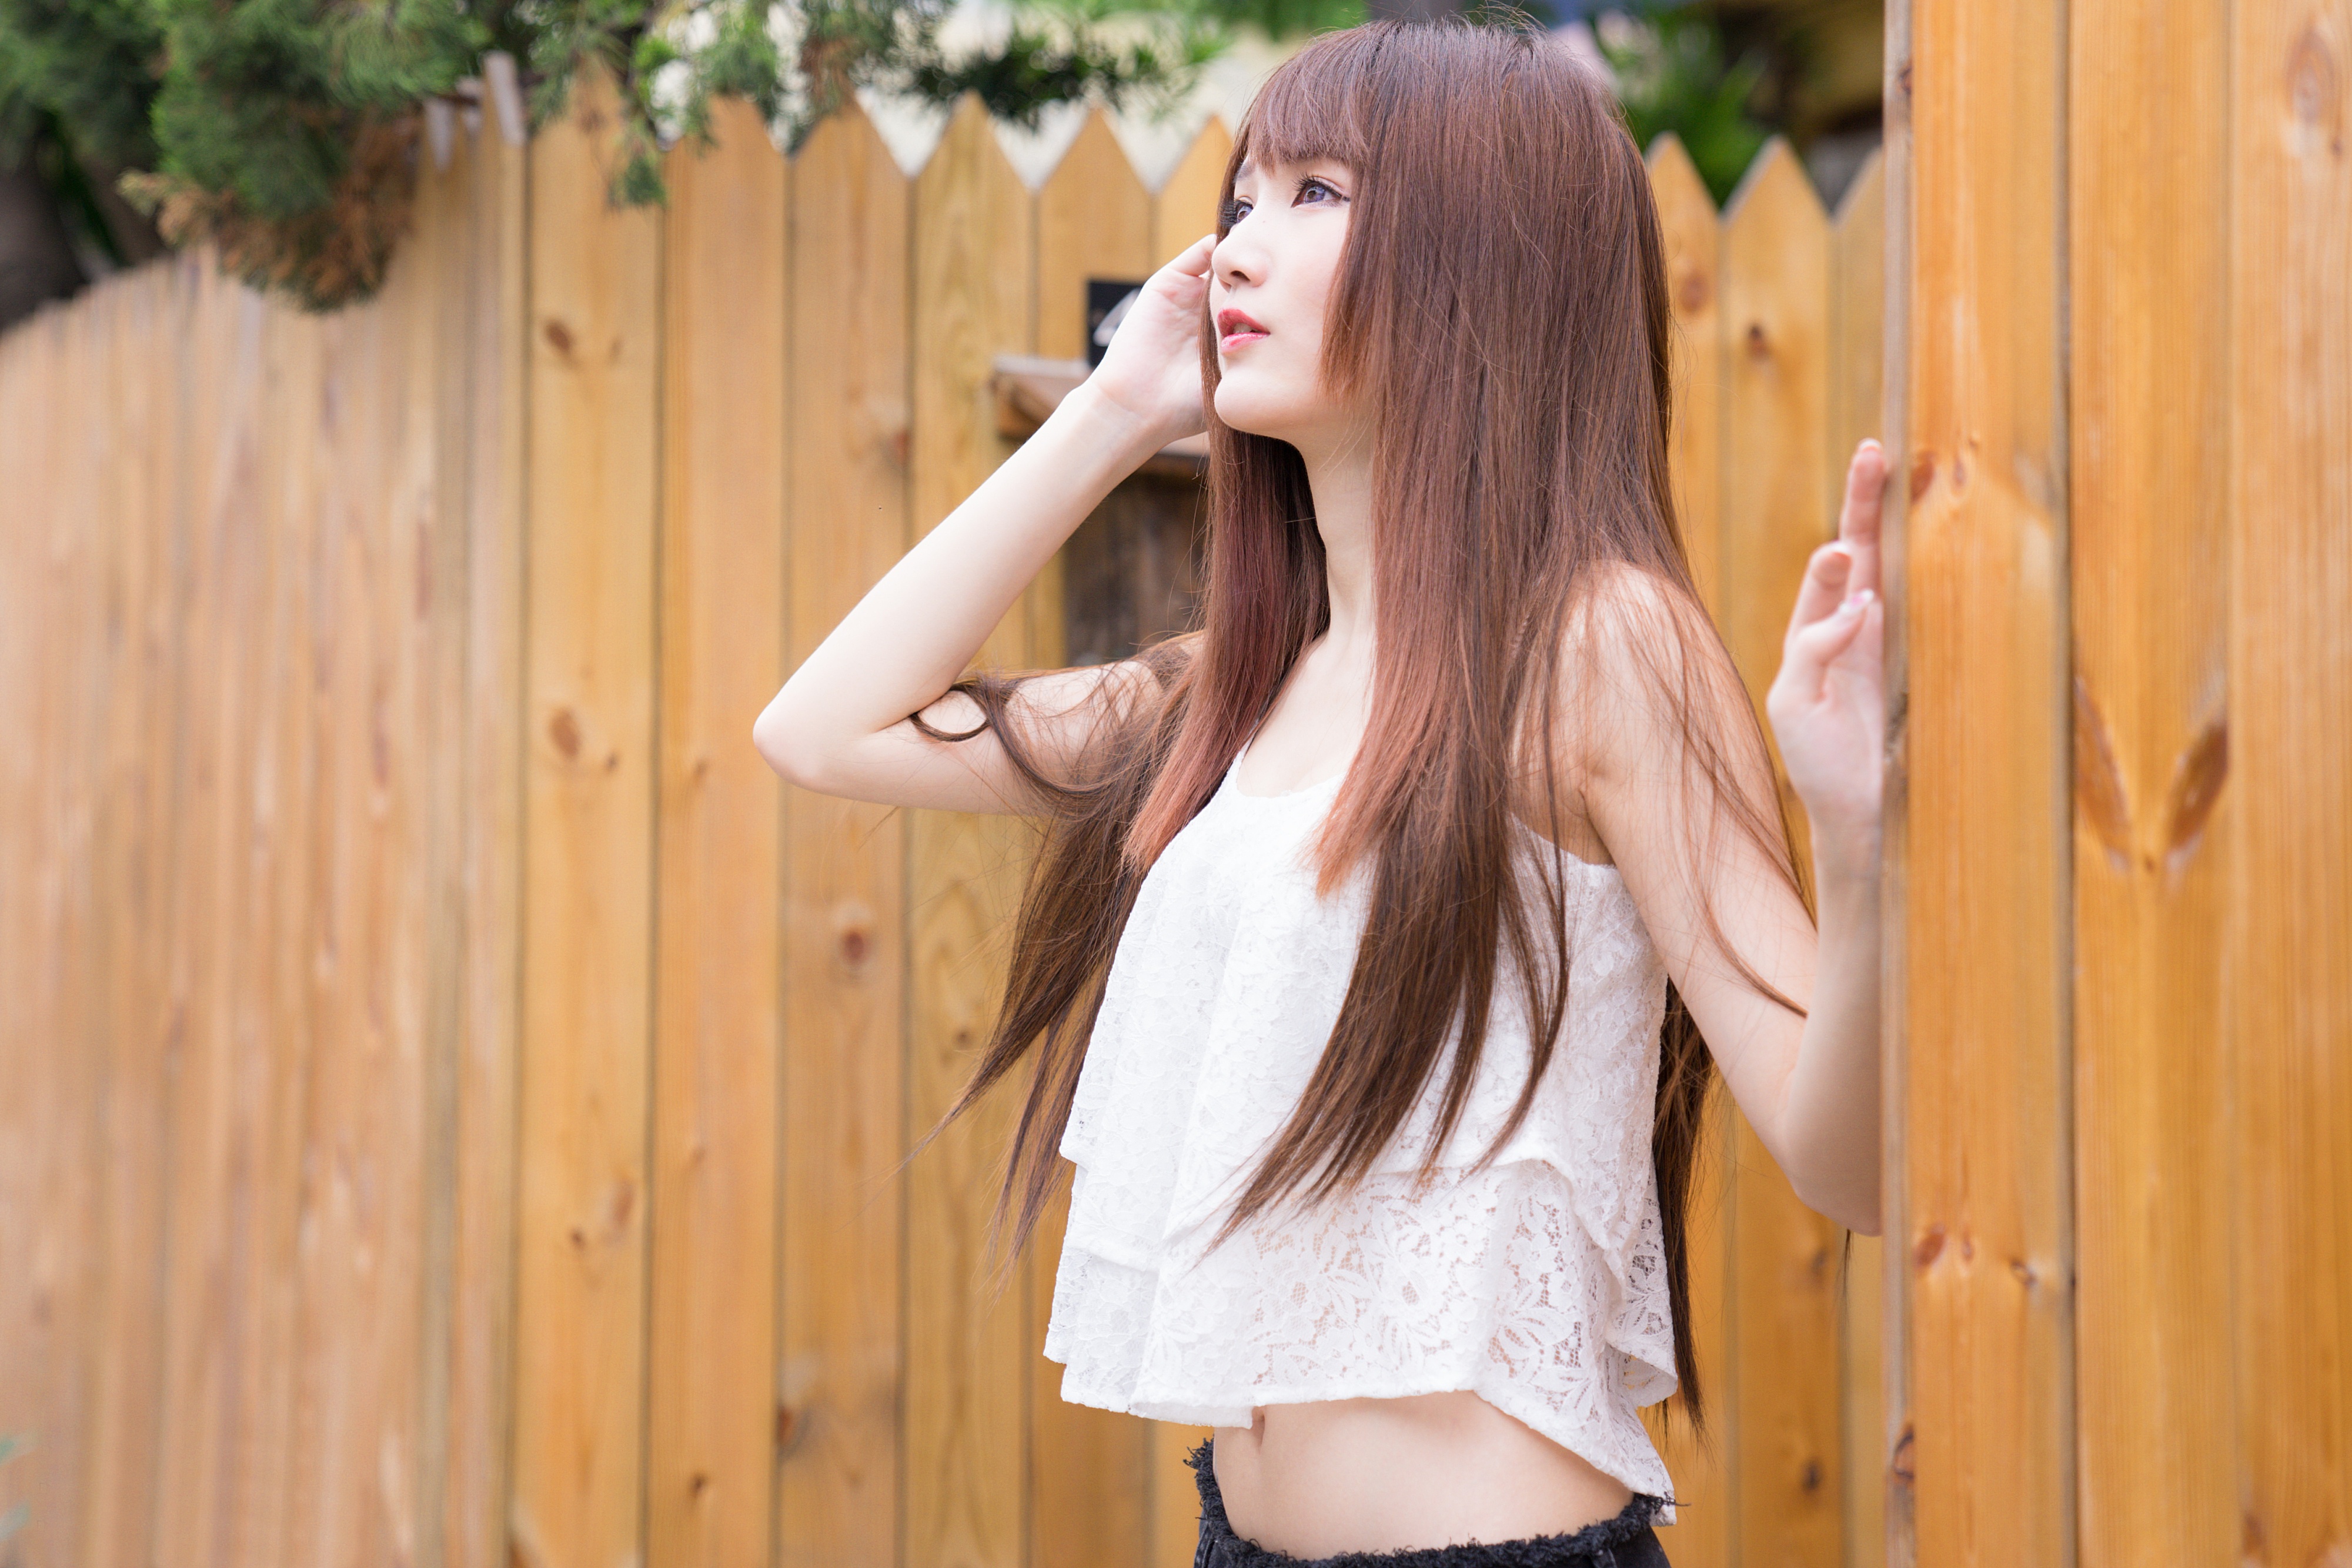 People 4000x2667 Asian women model long hair brunette white tops belly button looking into the distance wood fence